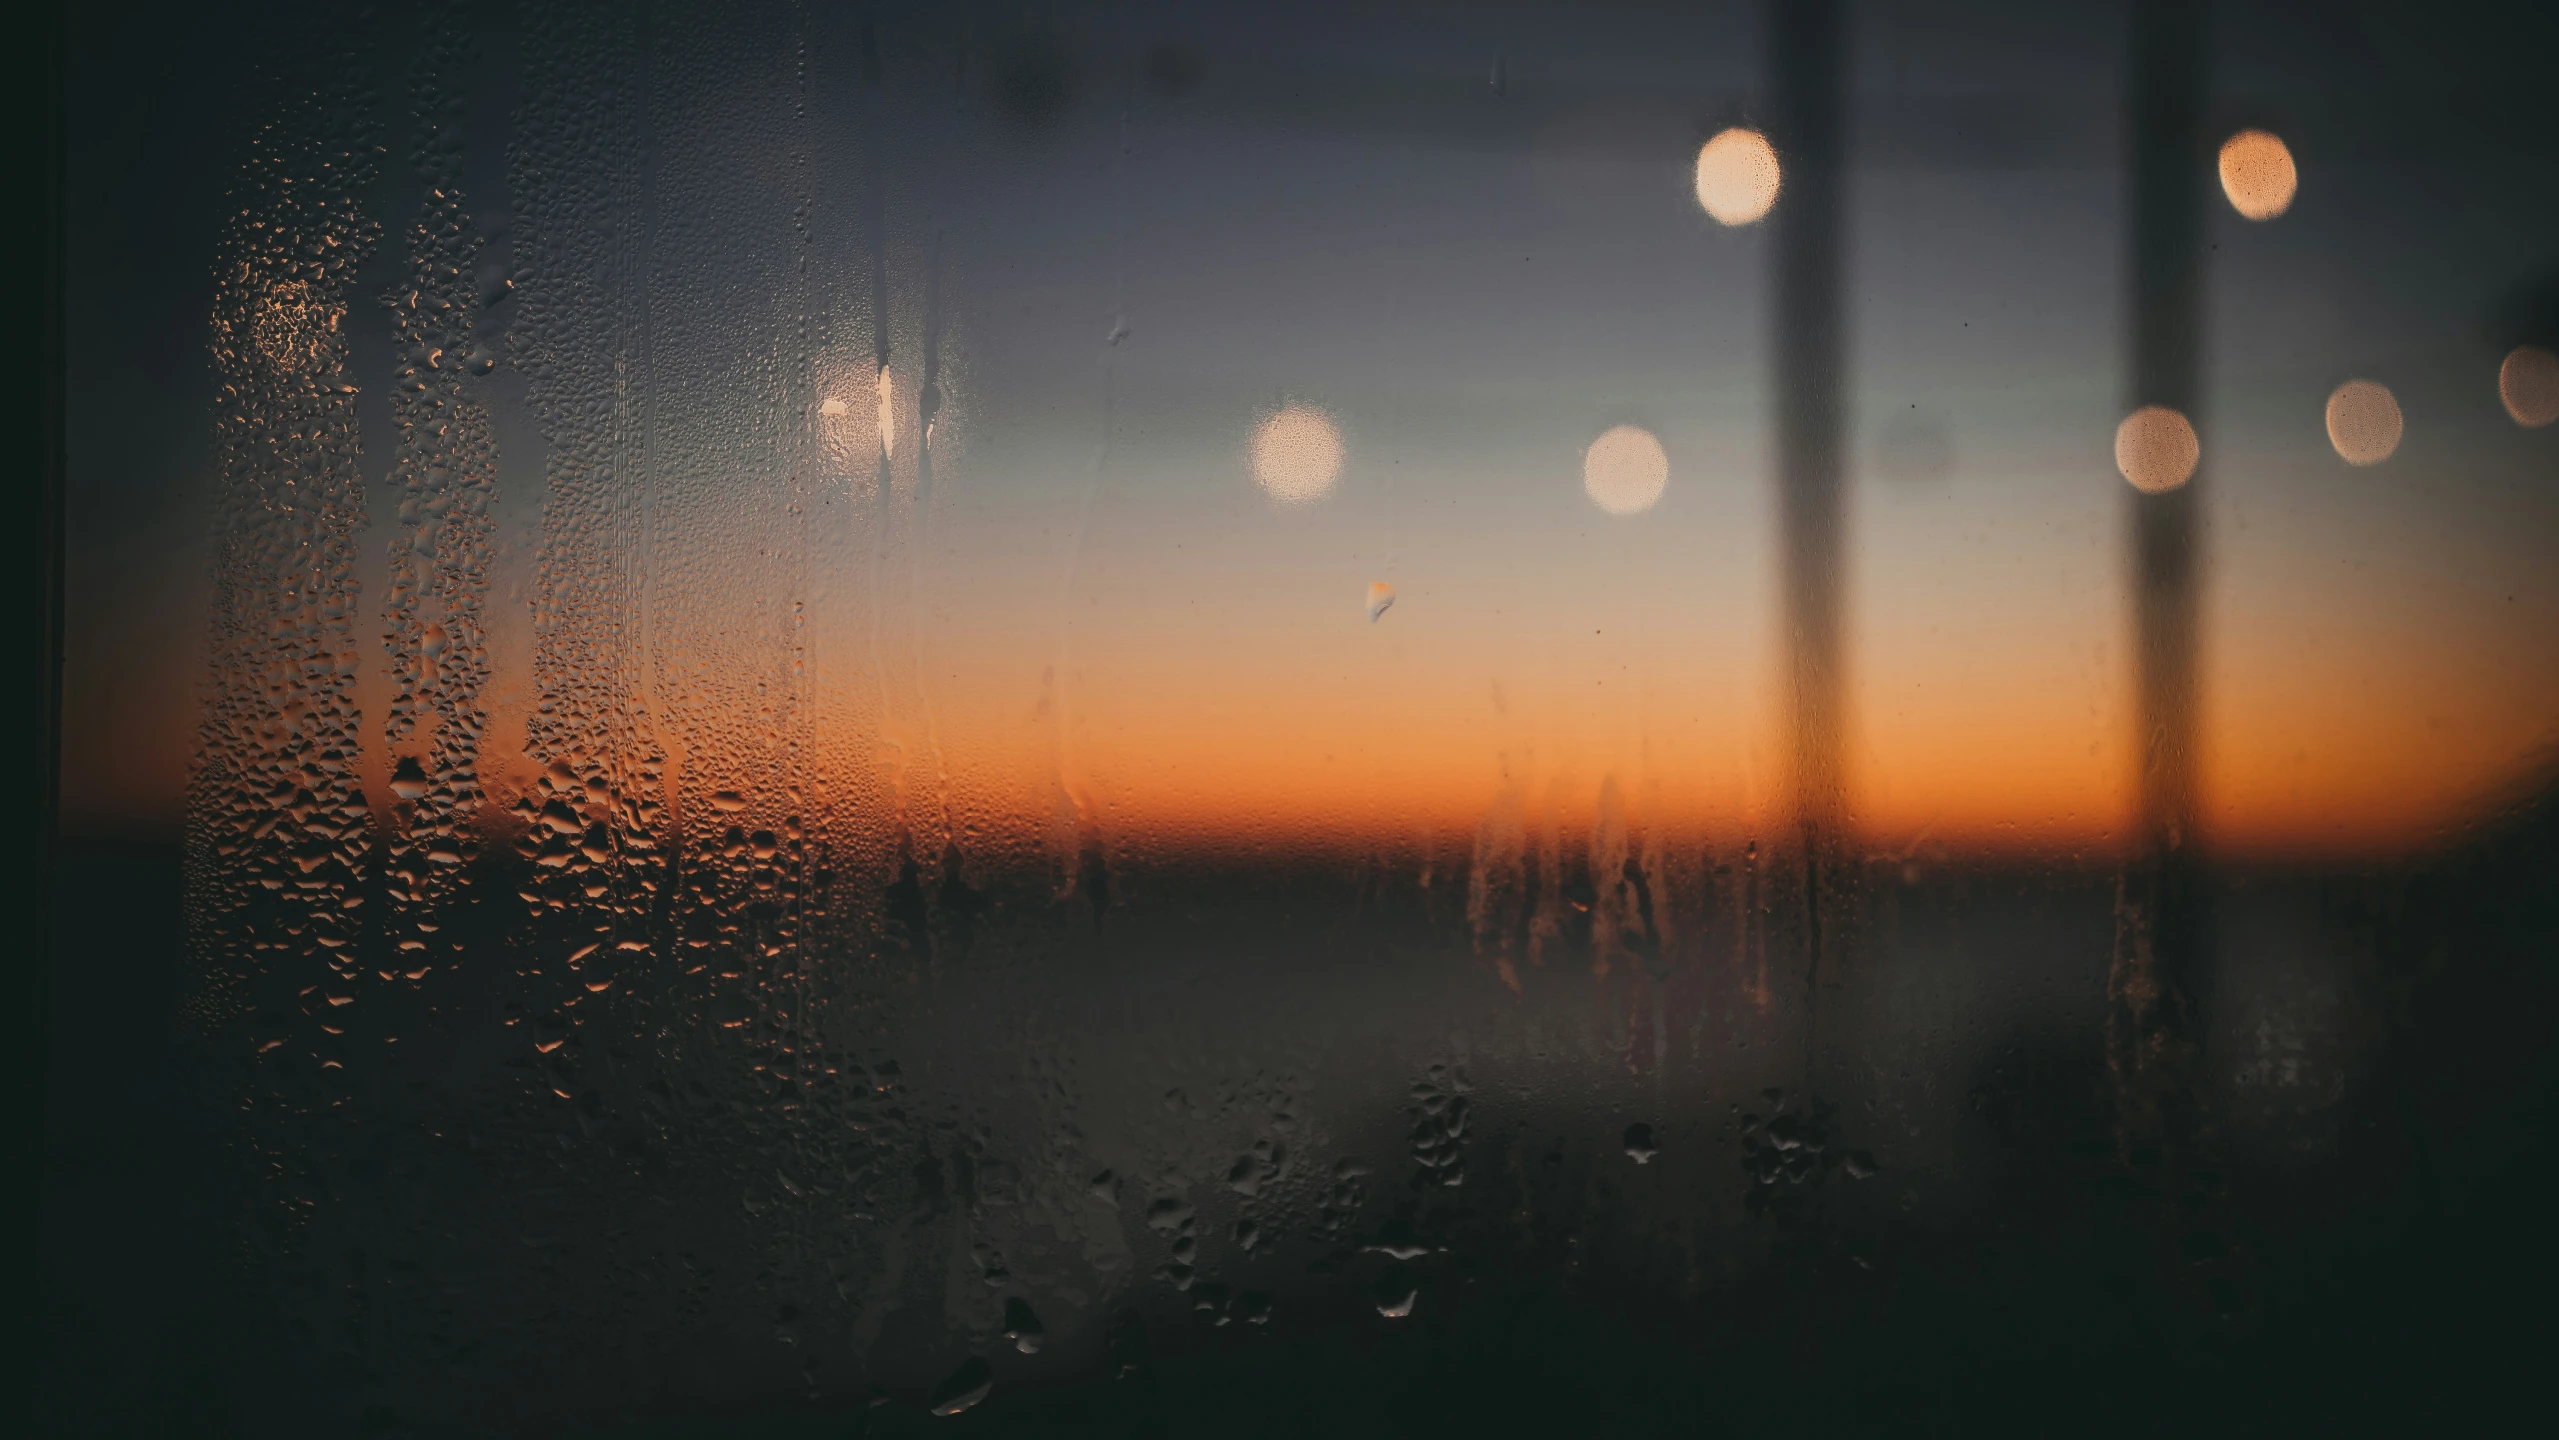 rain drops are visible on a window at sunset